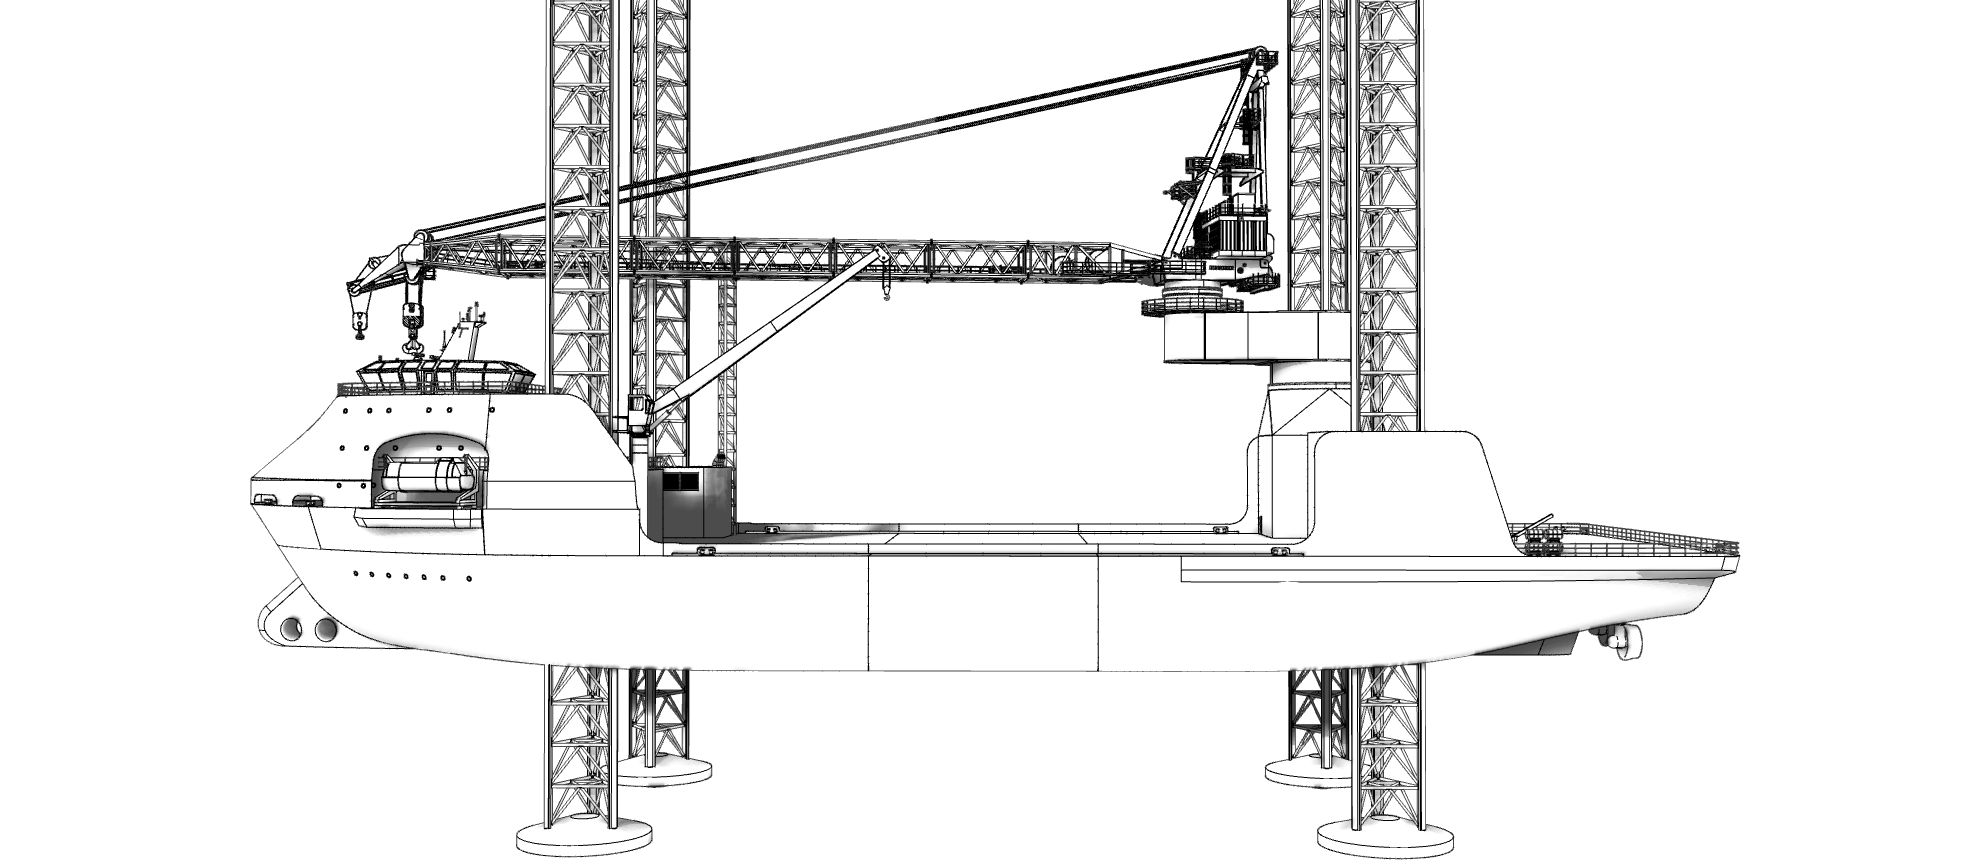 A project drawing of a SuperFeeder vessel